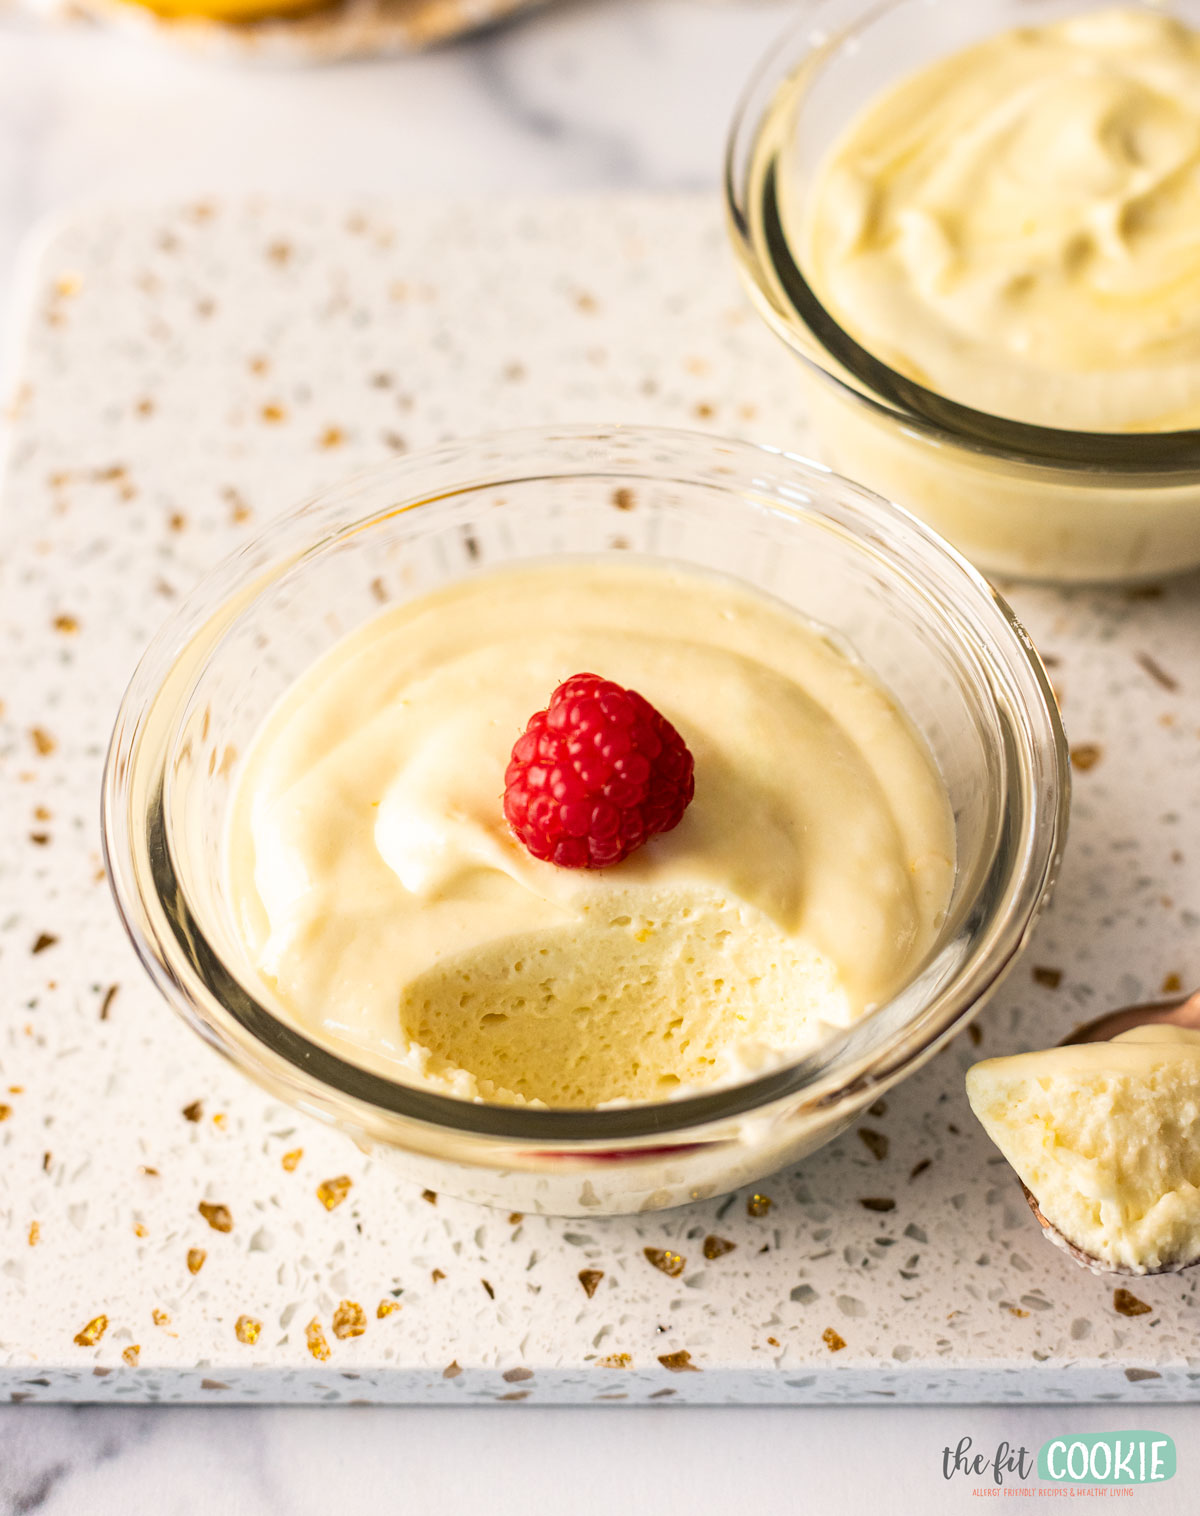 A bowl of vegan lemon mousse with a raspberry on top.